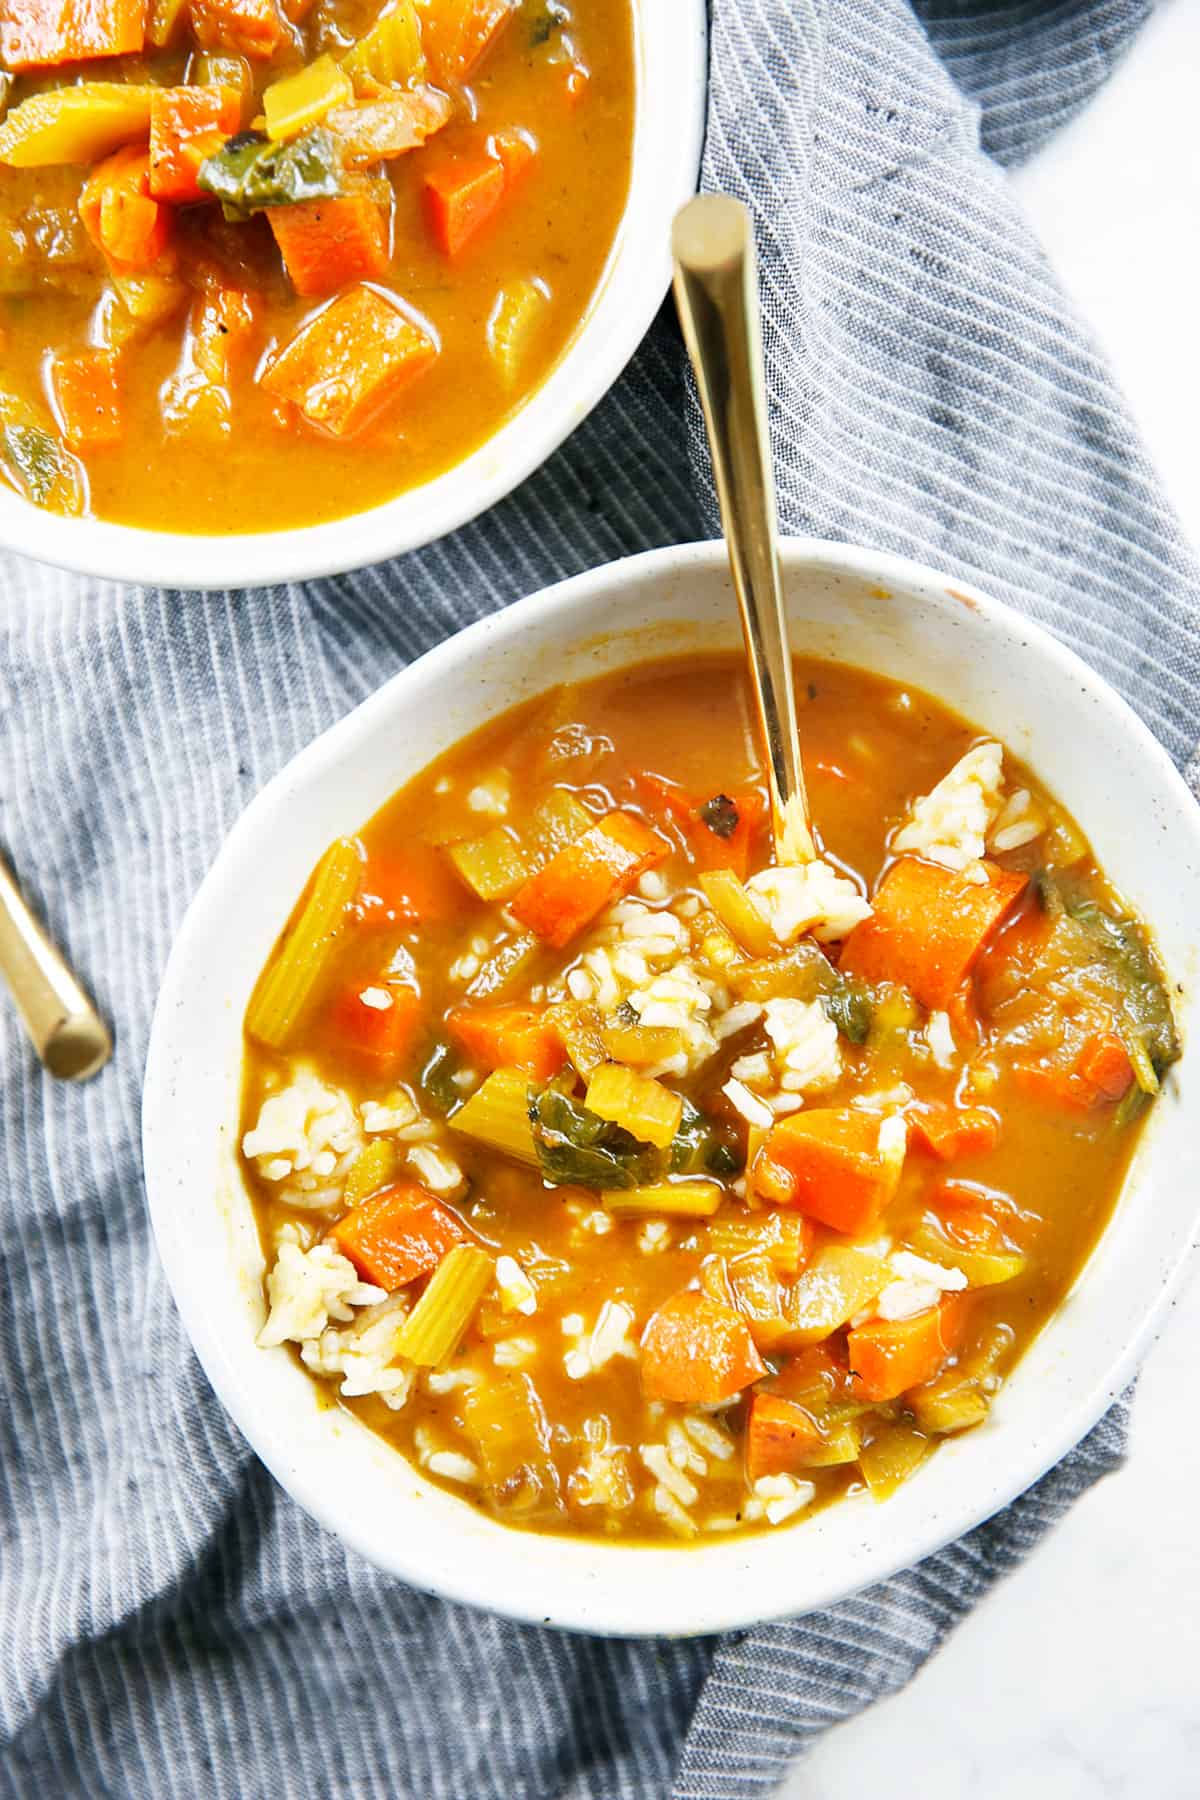 Immune boosting soup bowls with rice